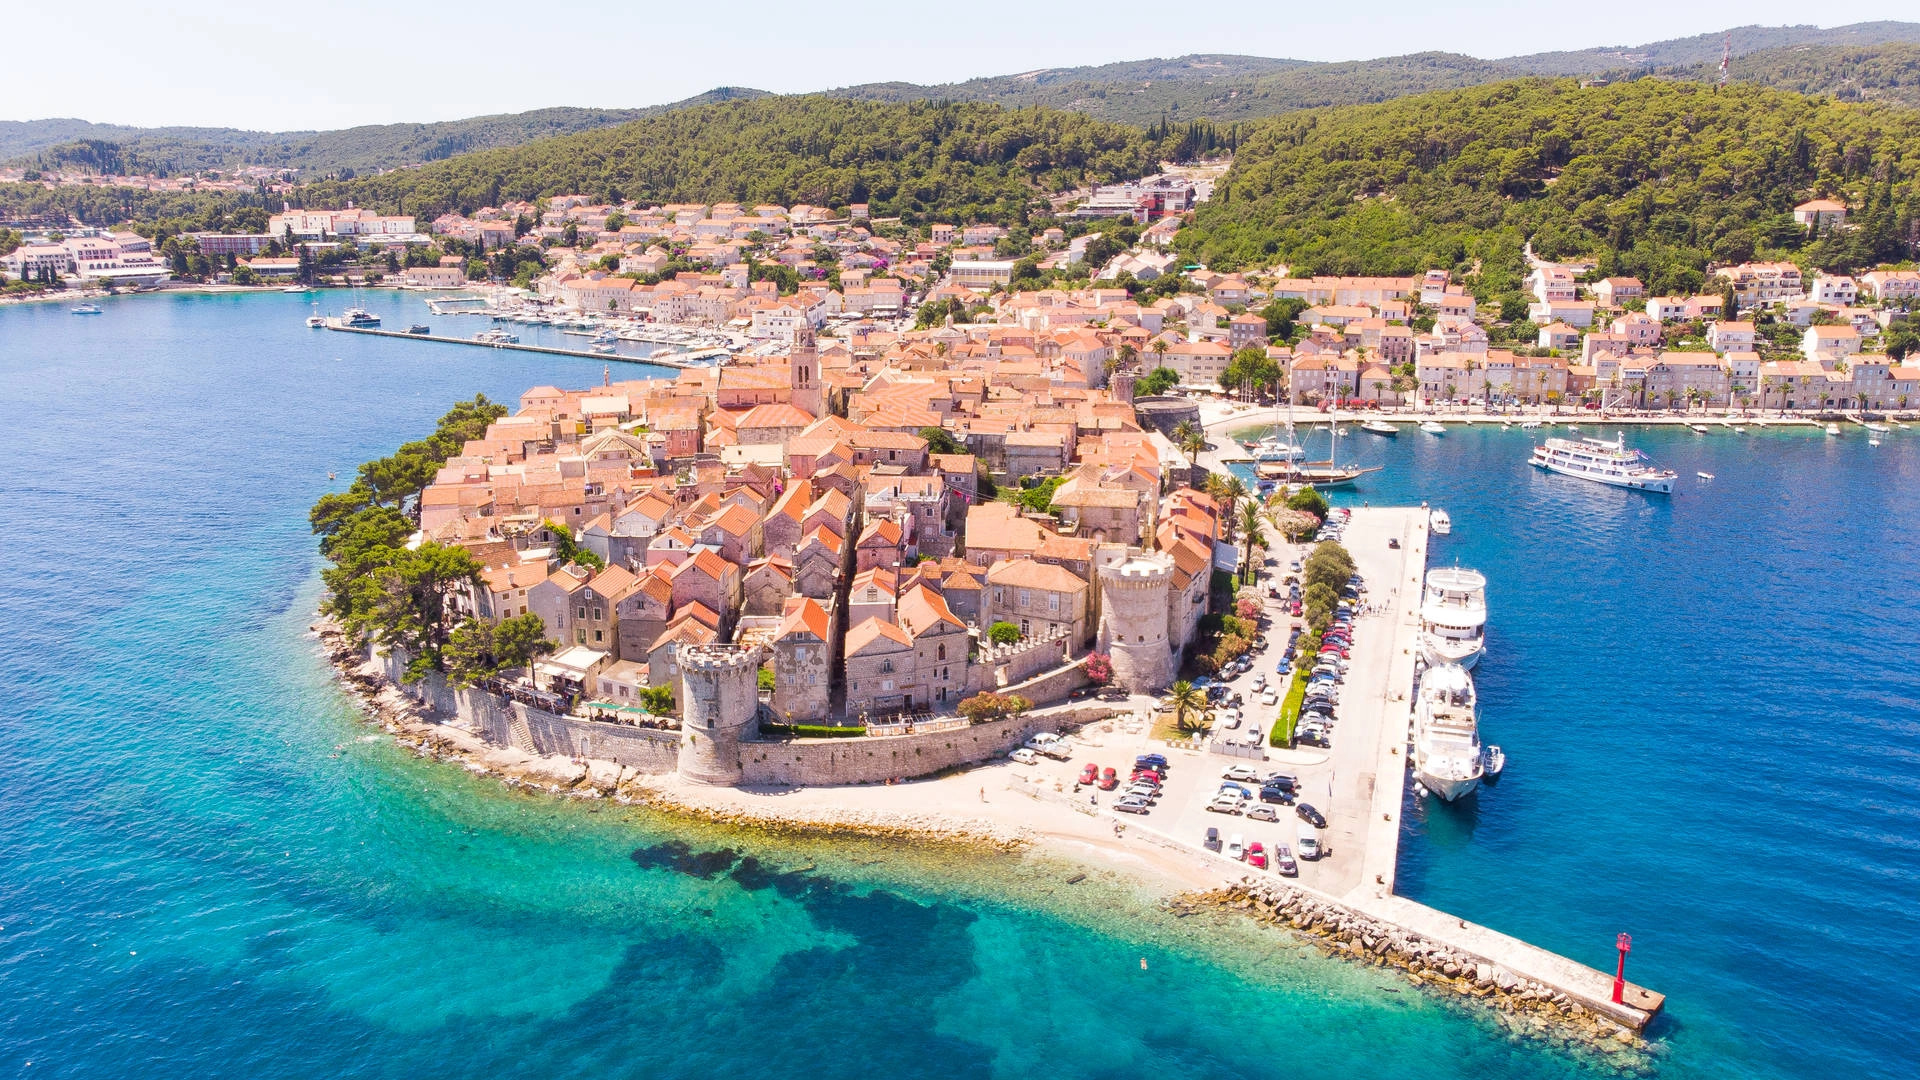 Korcula, Top things to do, Ultimate travel list, Exciting adventures, 1920x1080 Full HD Desktop